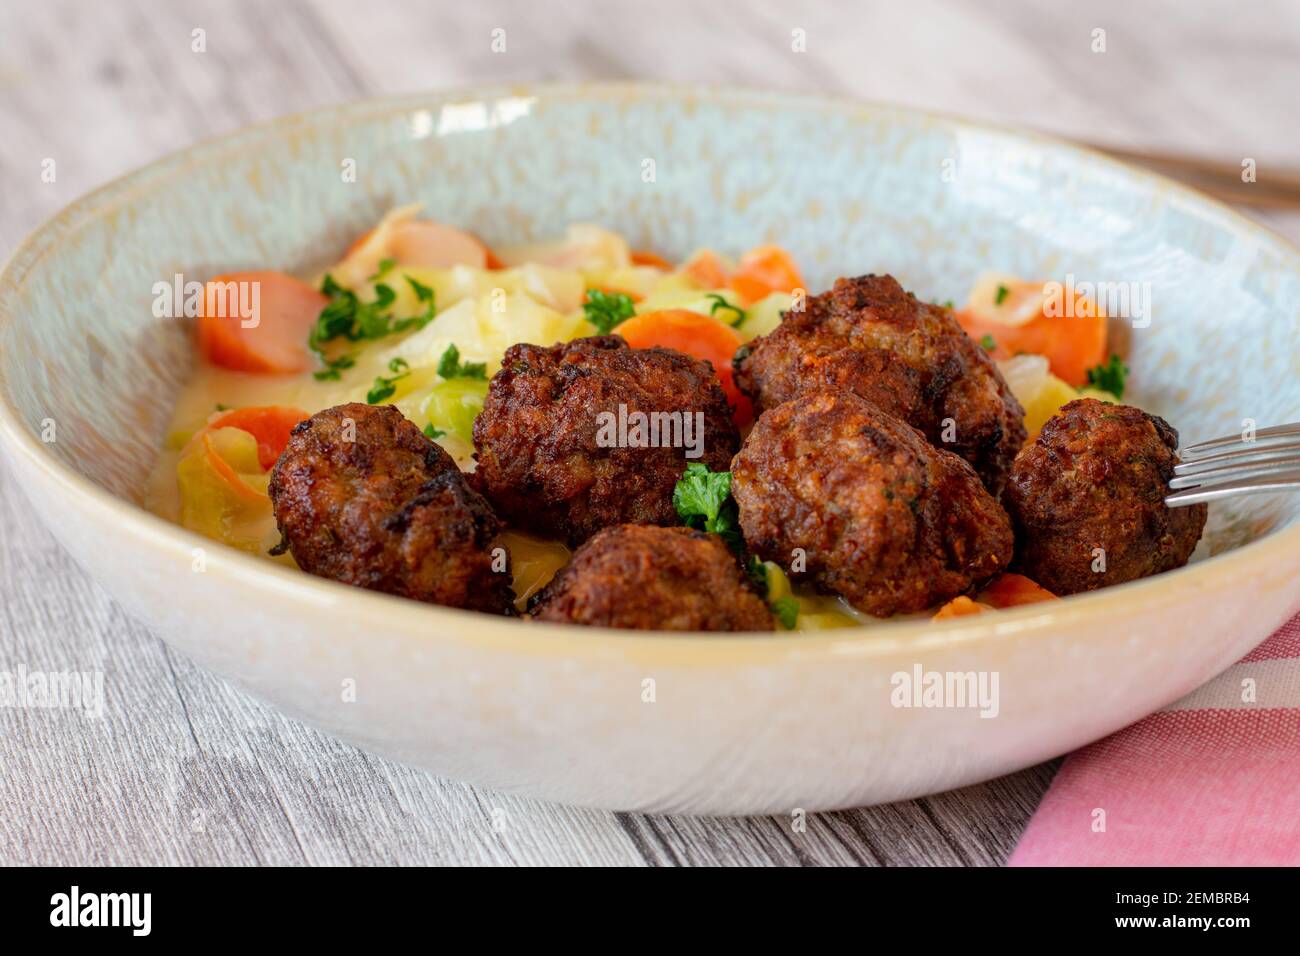 Köttbullar swedish meatballs with carrots and cabbage vegetables served on a plate Stock Photo